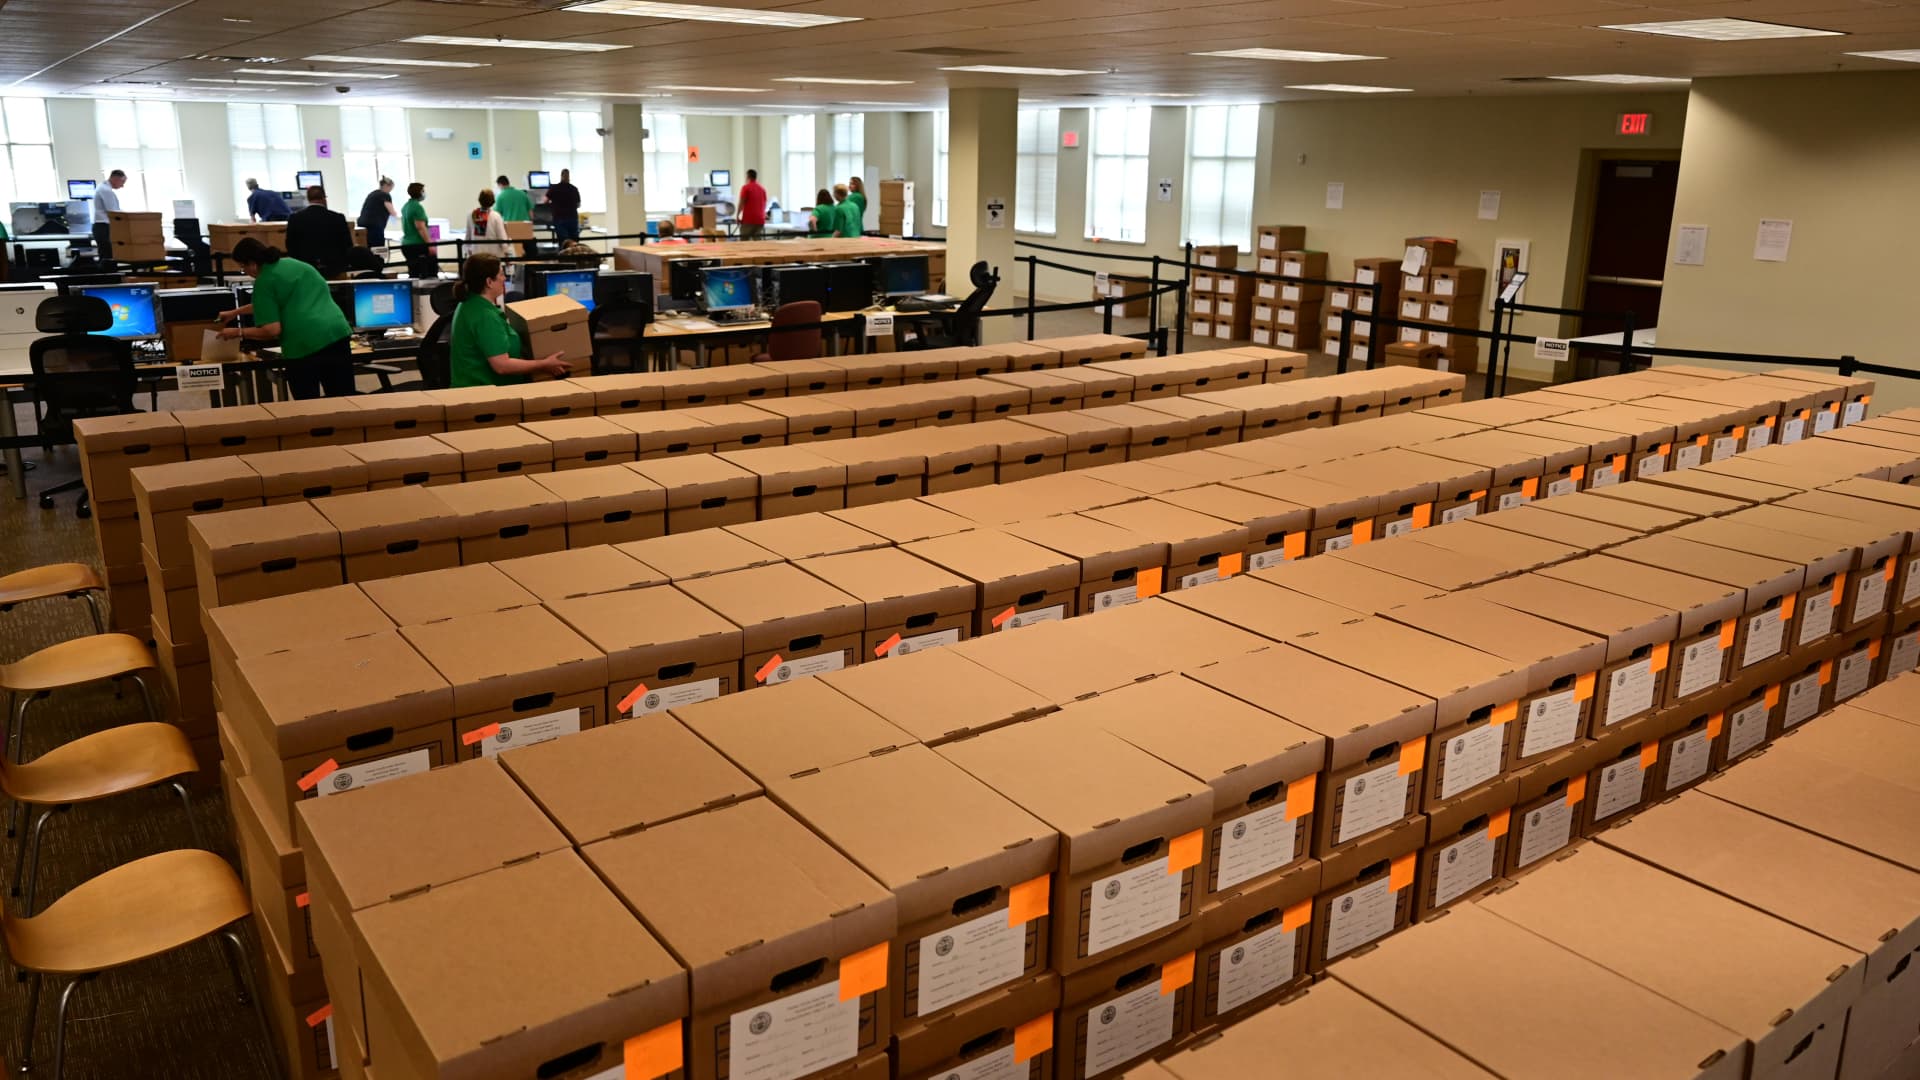 Boxes of ballots are stacked as county officials perform a ballot recount on June 2, 2022 in West Chester, Pennsylvania. With less than 1,000 votes separating Republican U.S. Senate candidates Dr. Mehmet Oz and David McCormick, a state wide recount has begun in the too-close-to-call Republican primary contest in Pennsylvania.